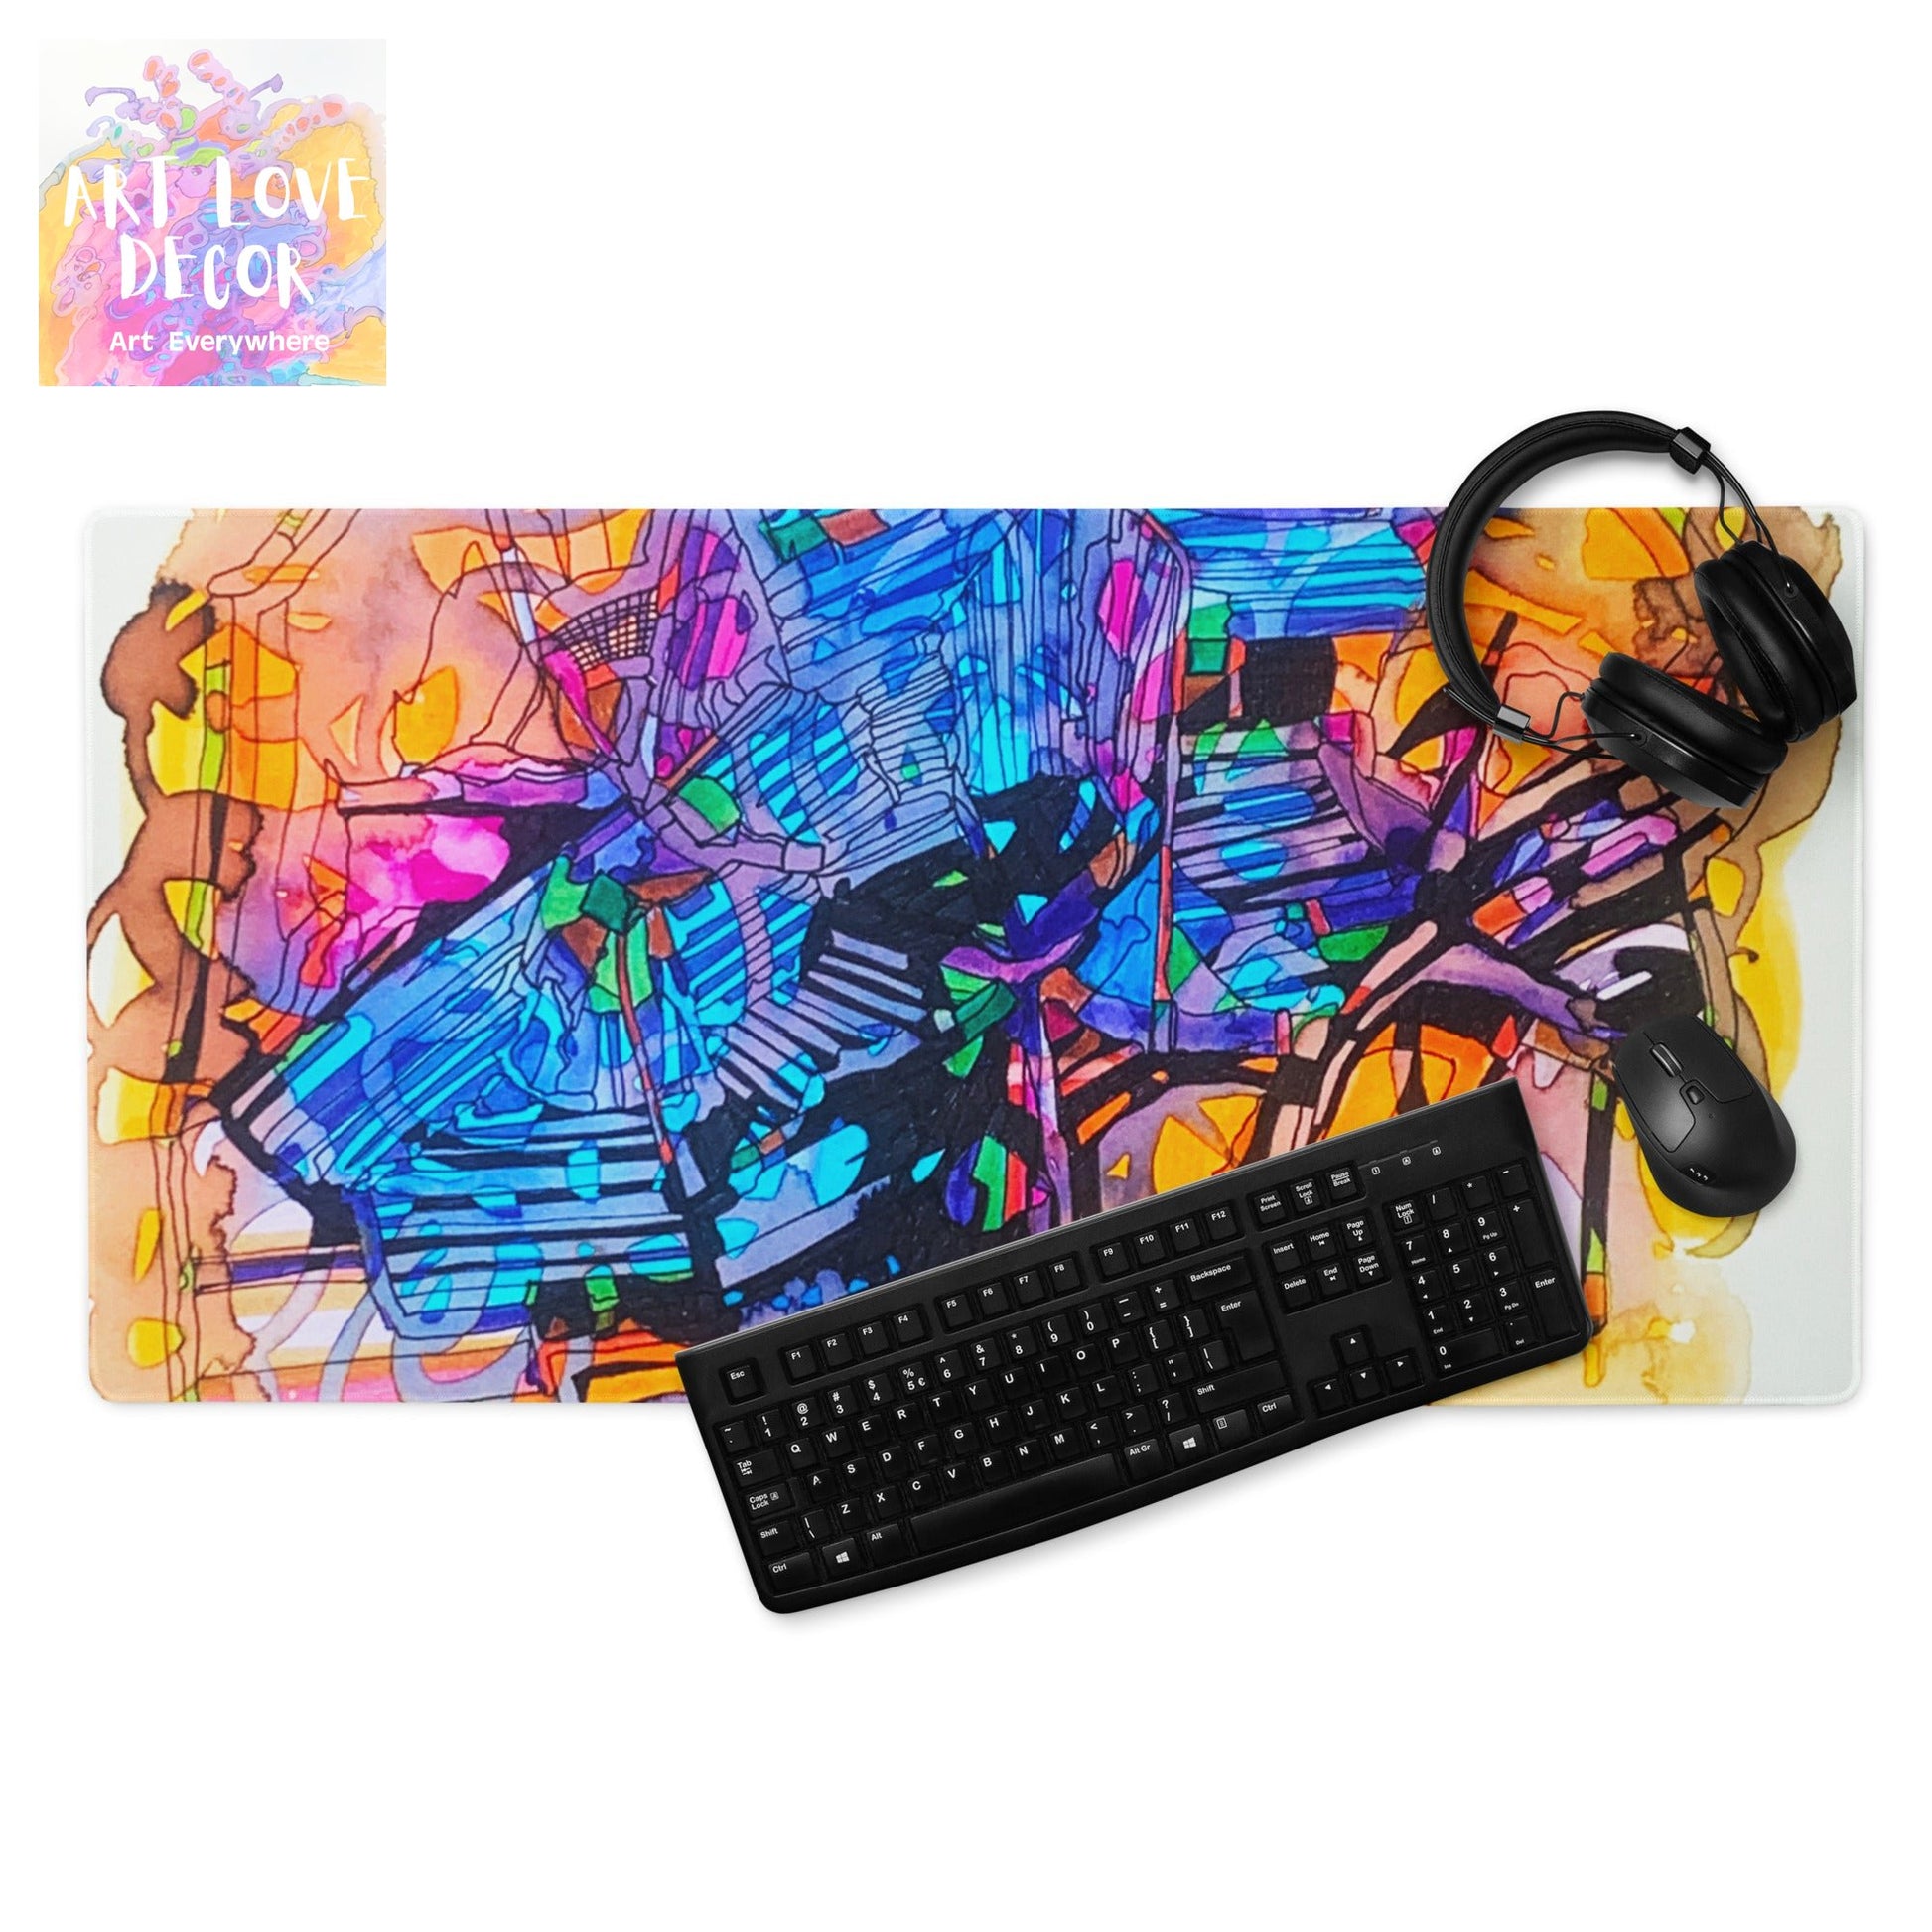 Dark Places Abstract Gaming mouse pad - Art Love Decor